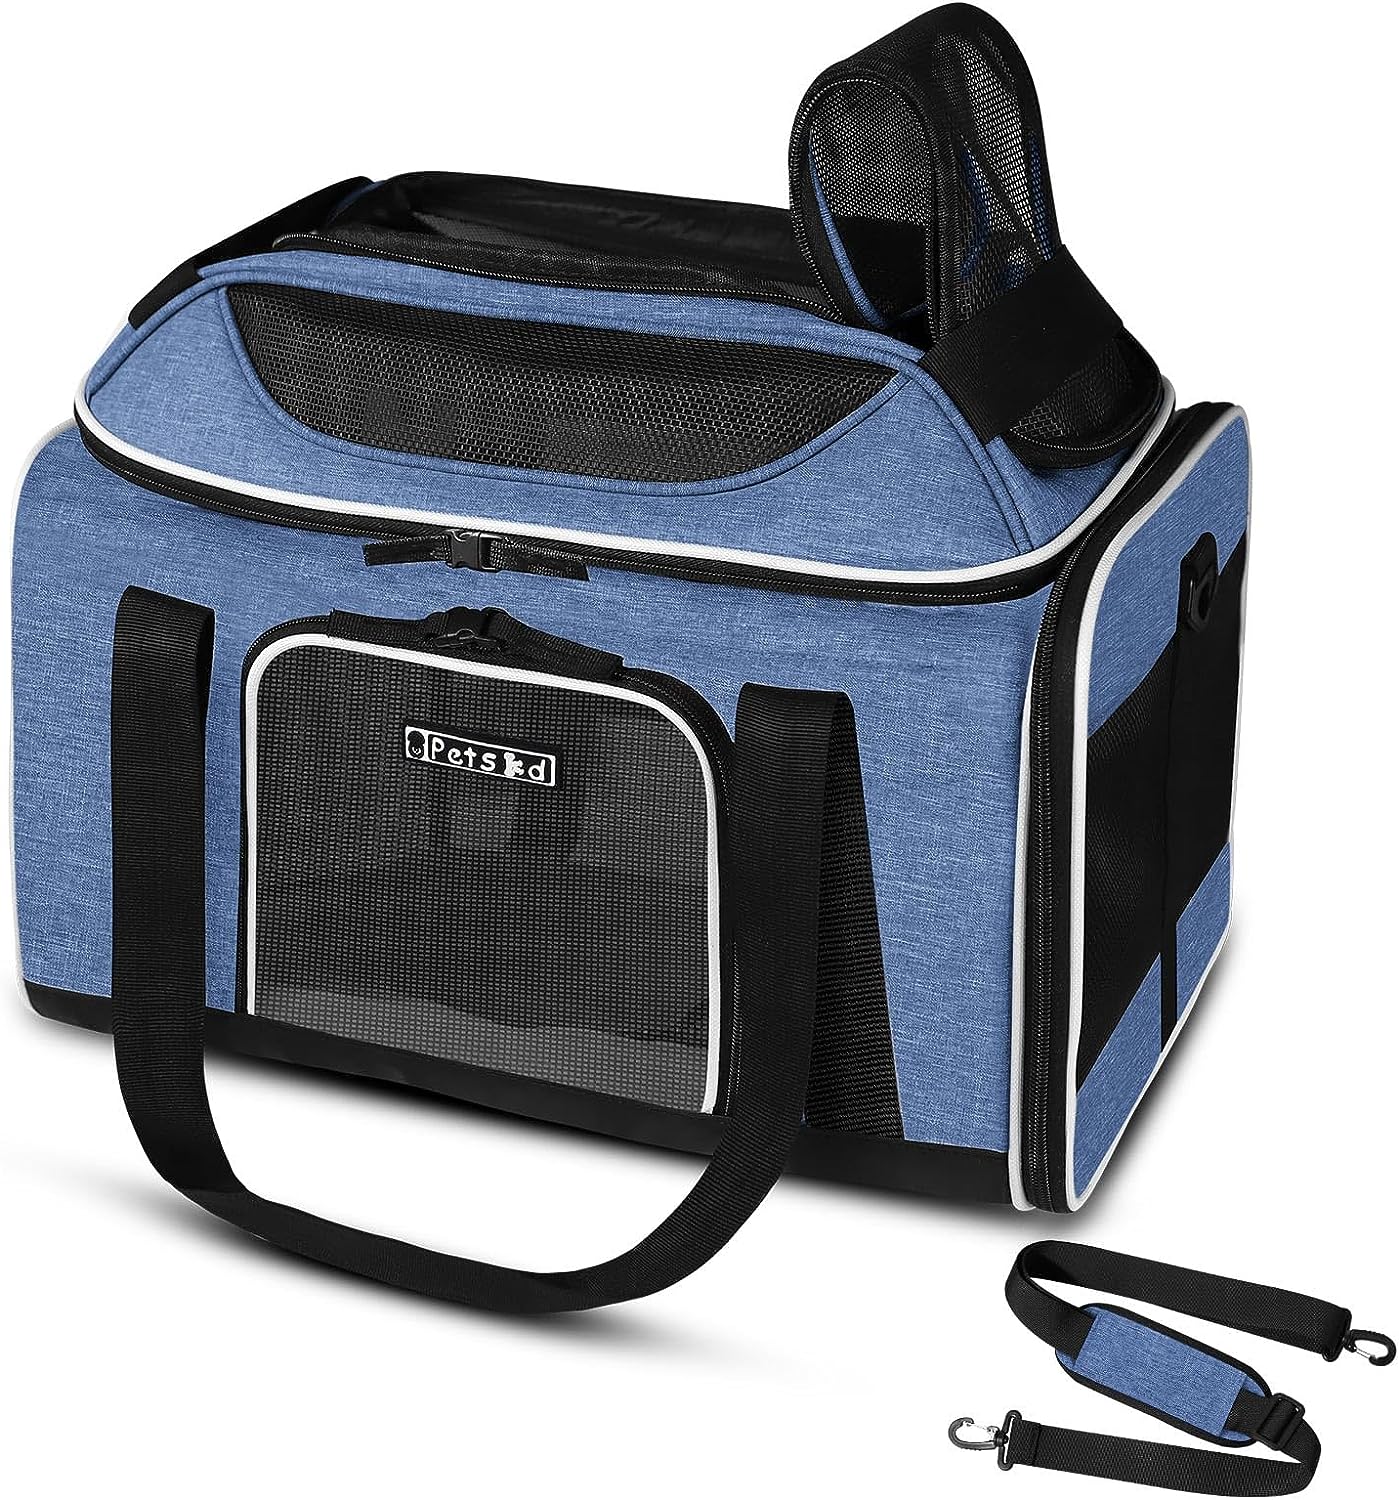 You are currently viewing Petskd Pet Carrier Review